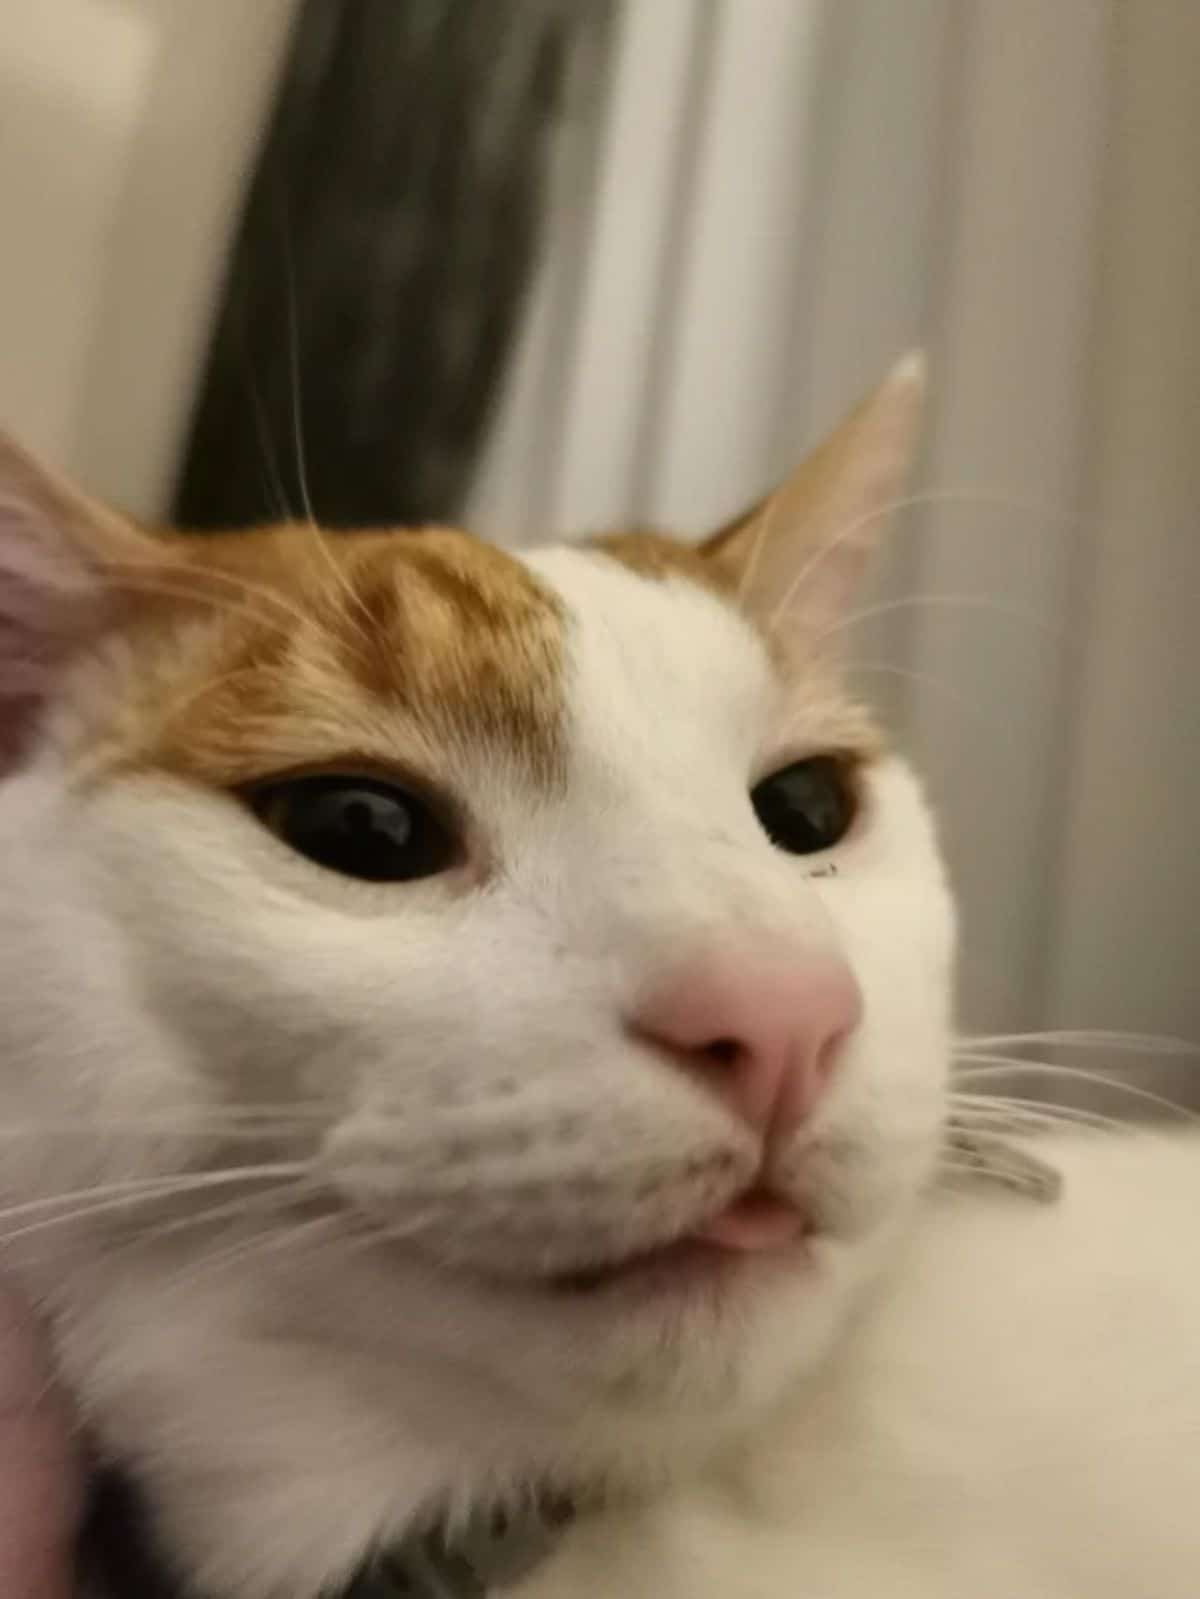 white and orange cat with the tongue sticking out slightly